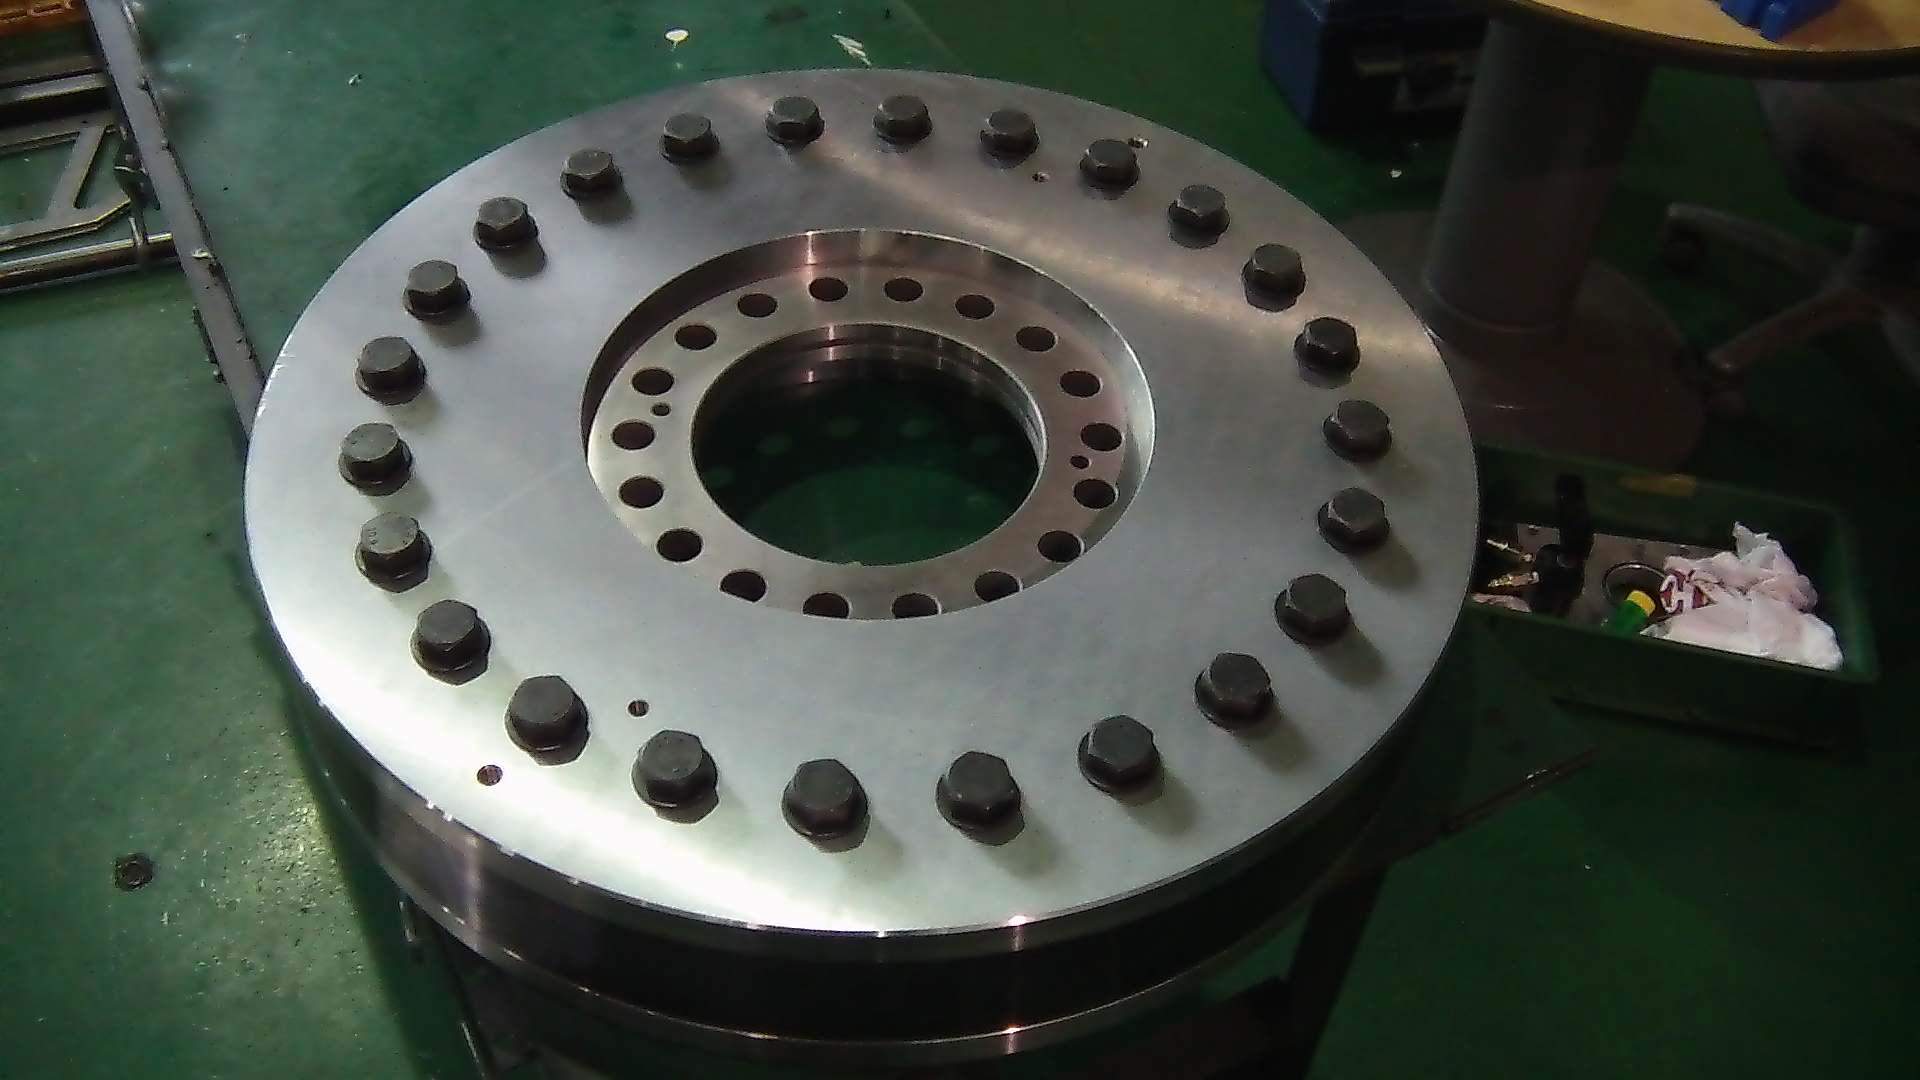 Components of the damper